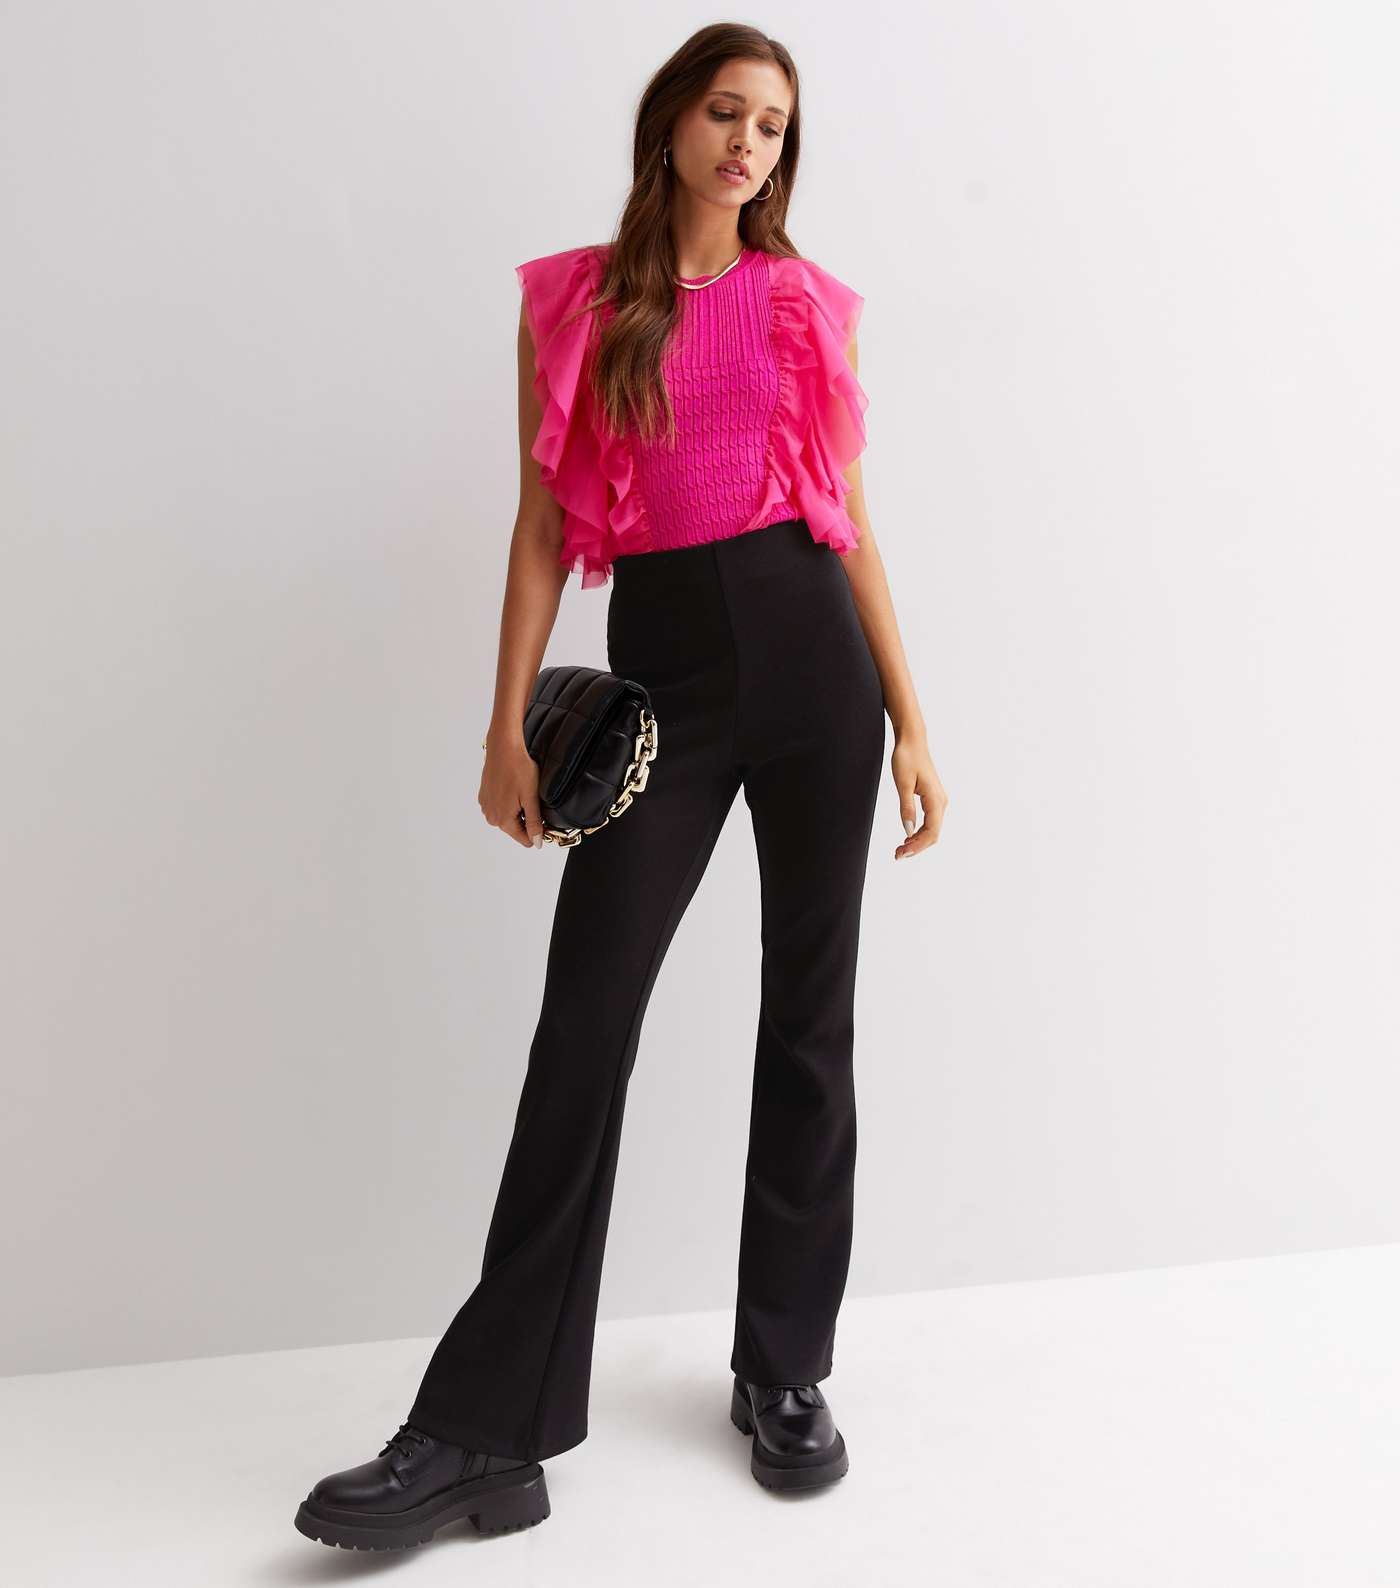 Cameo Rose Bright Pink Cable Knit Ruffle Bodysuit Image 2